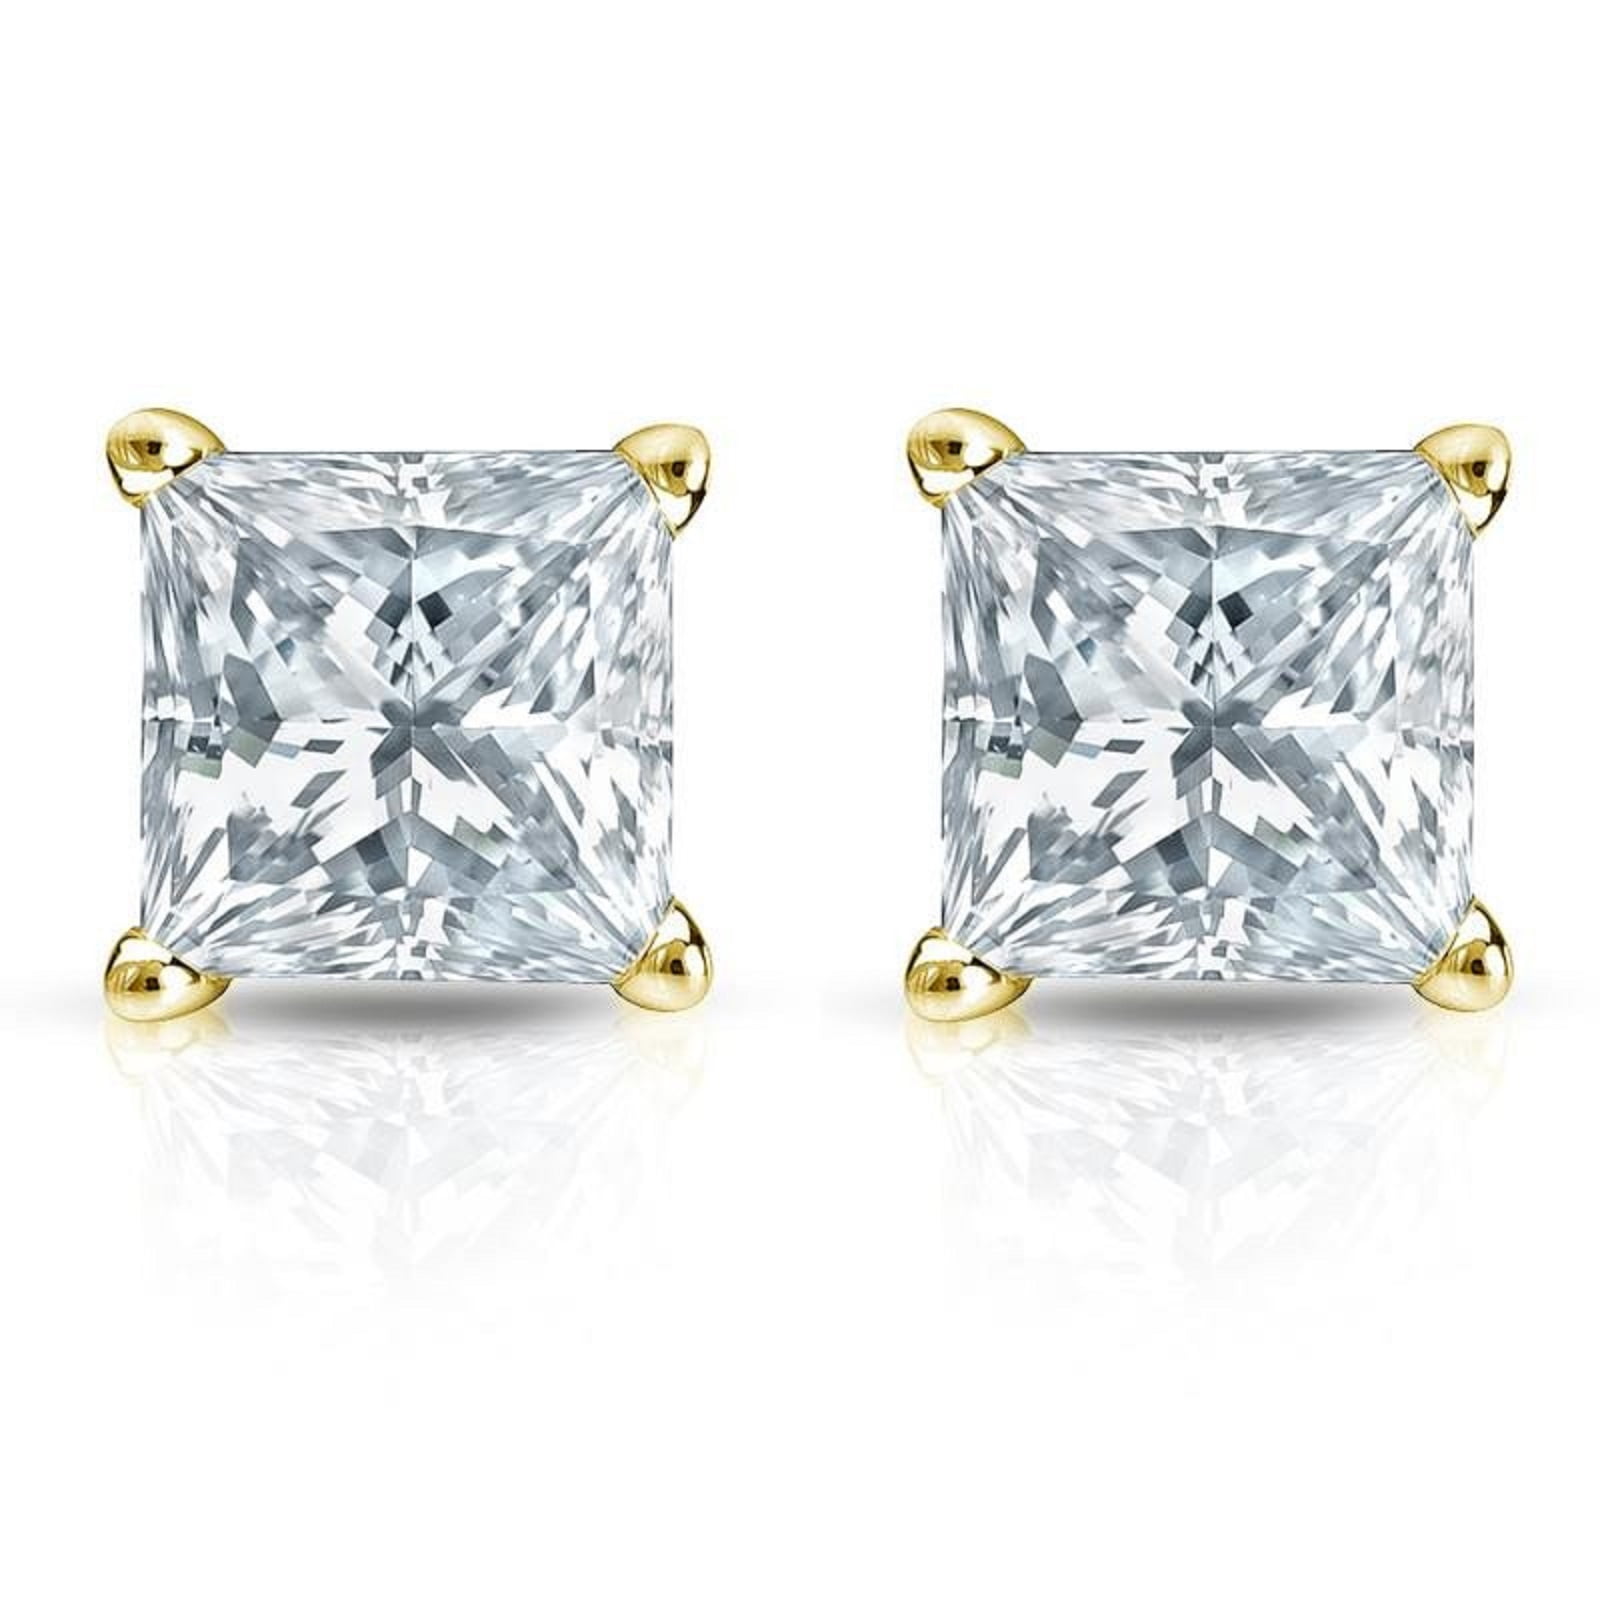 Clara Pucci 3.90 CT Princess Brilliant Cut Solitaire Stud Earrings in 14k Yellow Gold Push Back